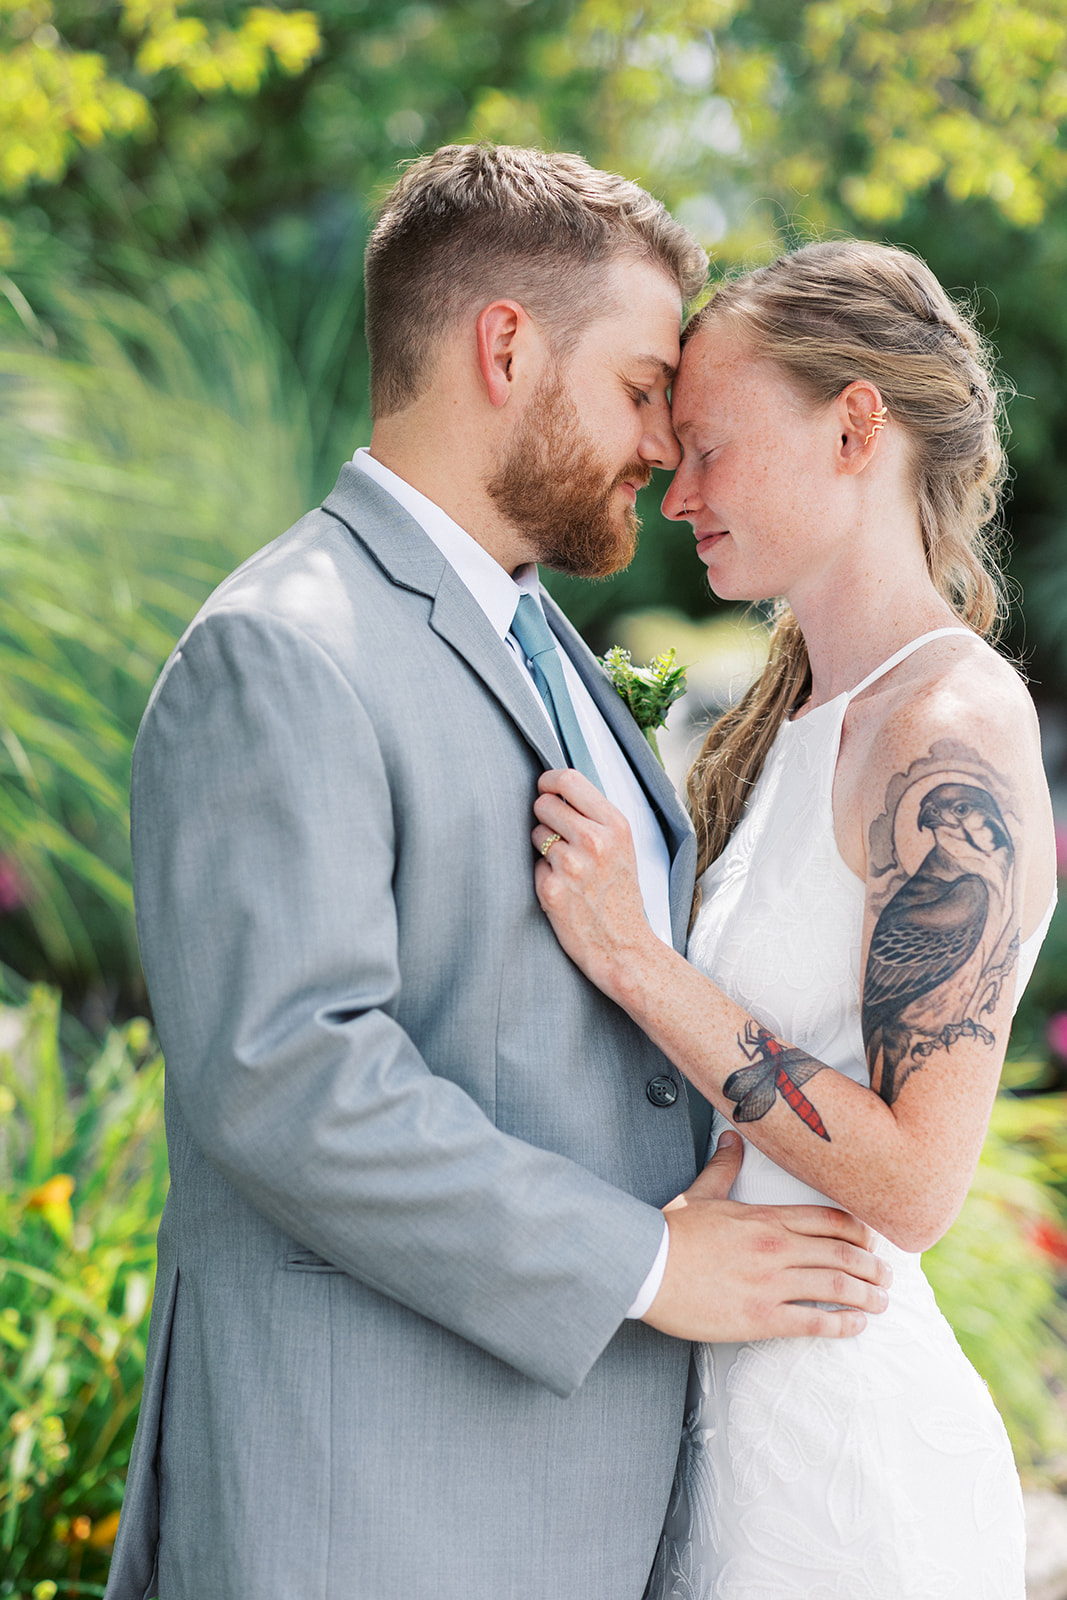 Newlyweds hold each other close while nuzzling foreheads in a garden at a Taylor Butler House Wedding